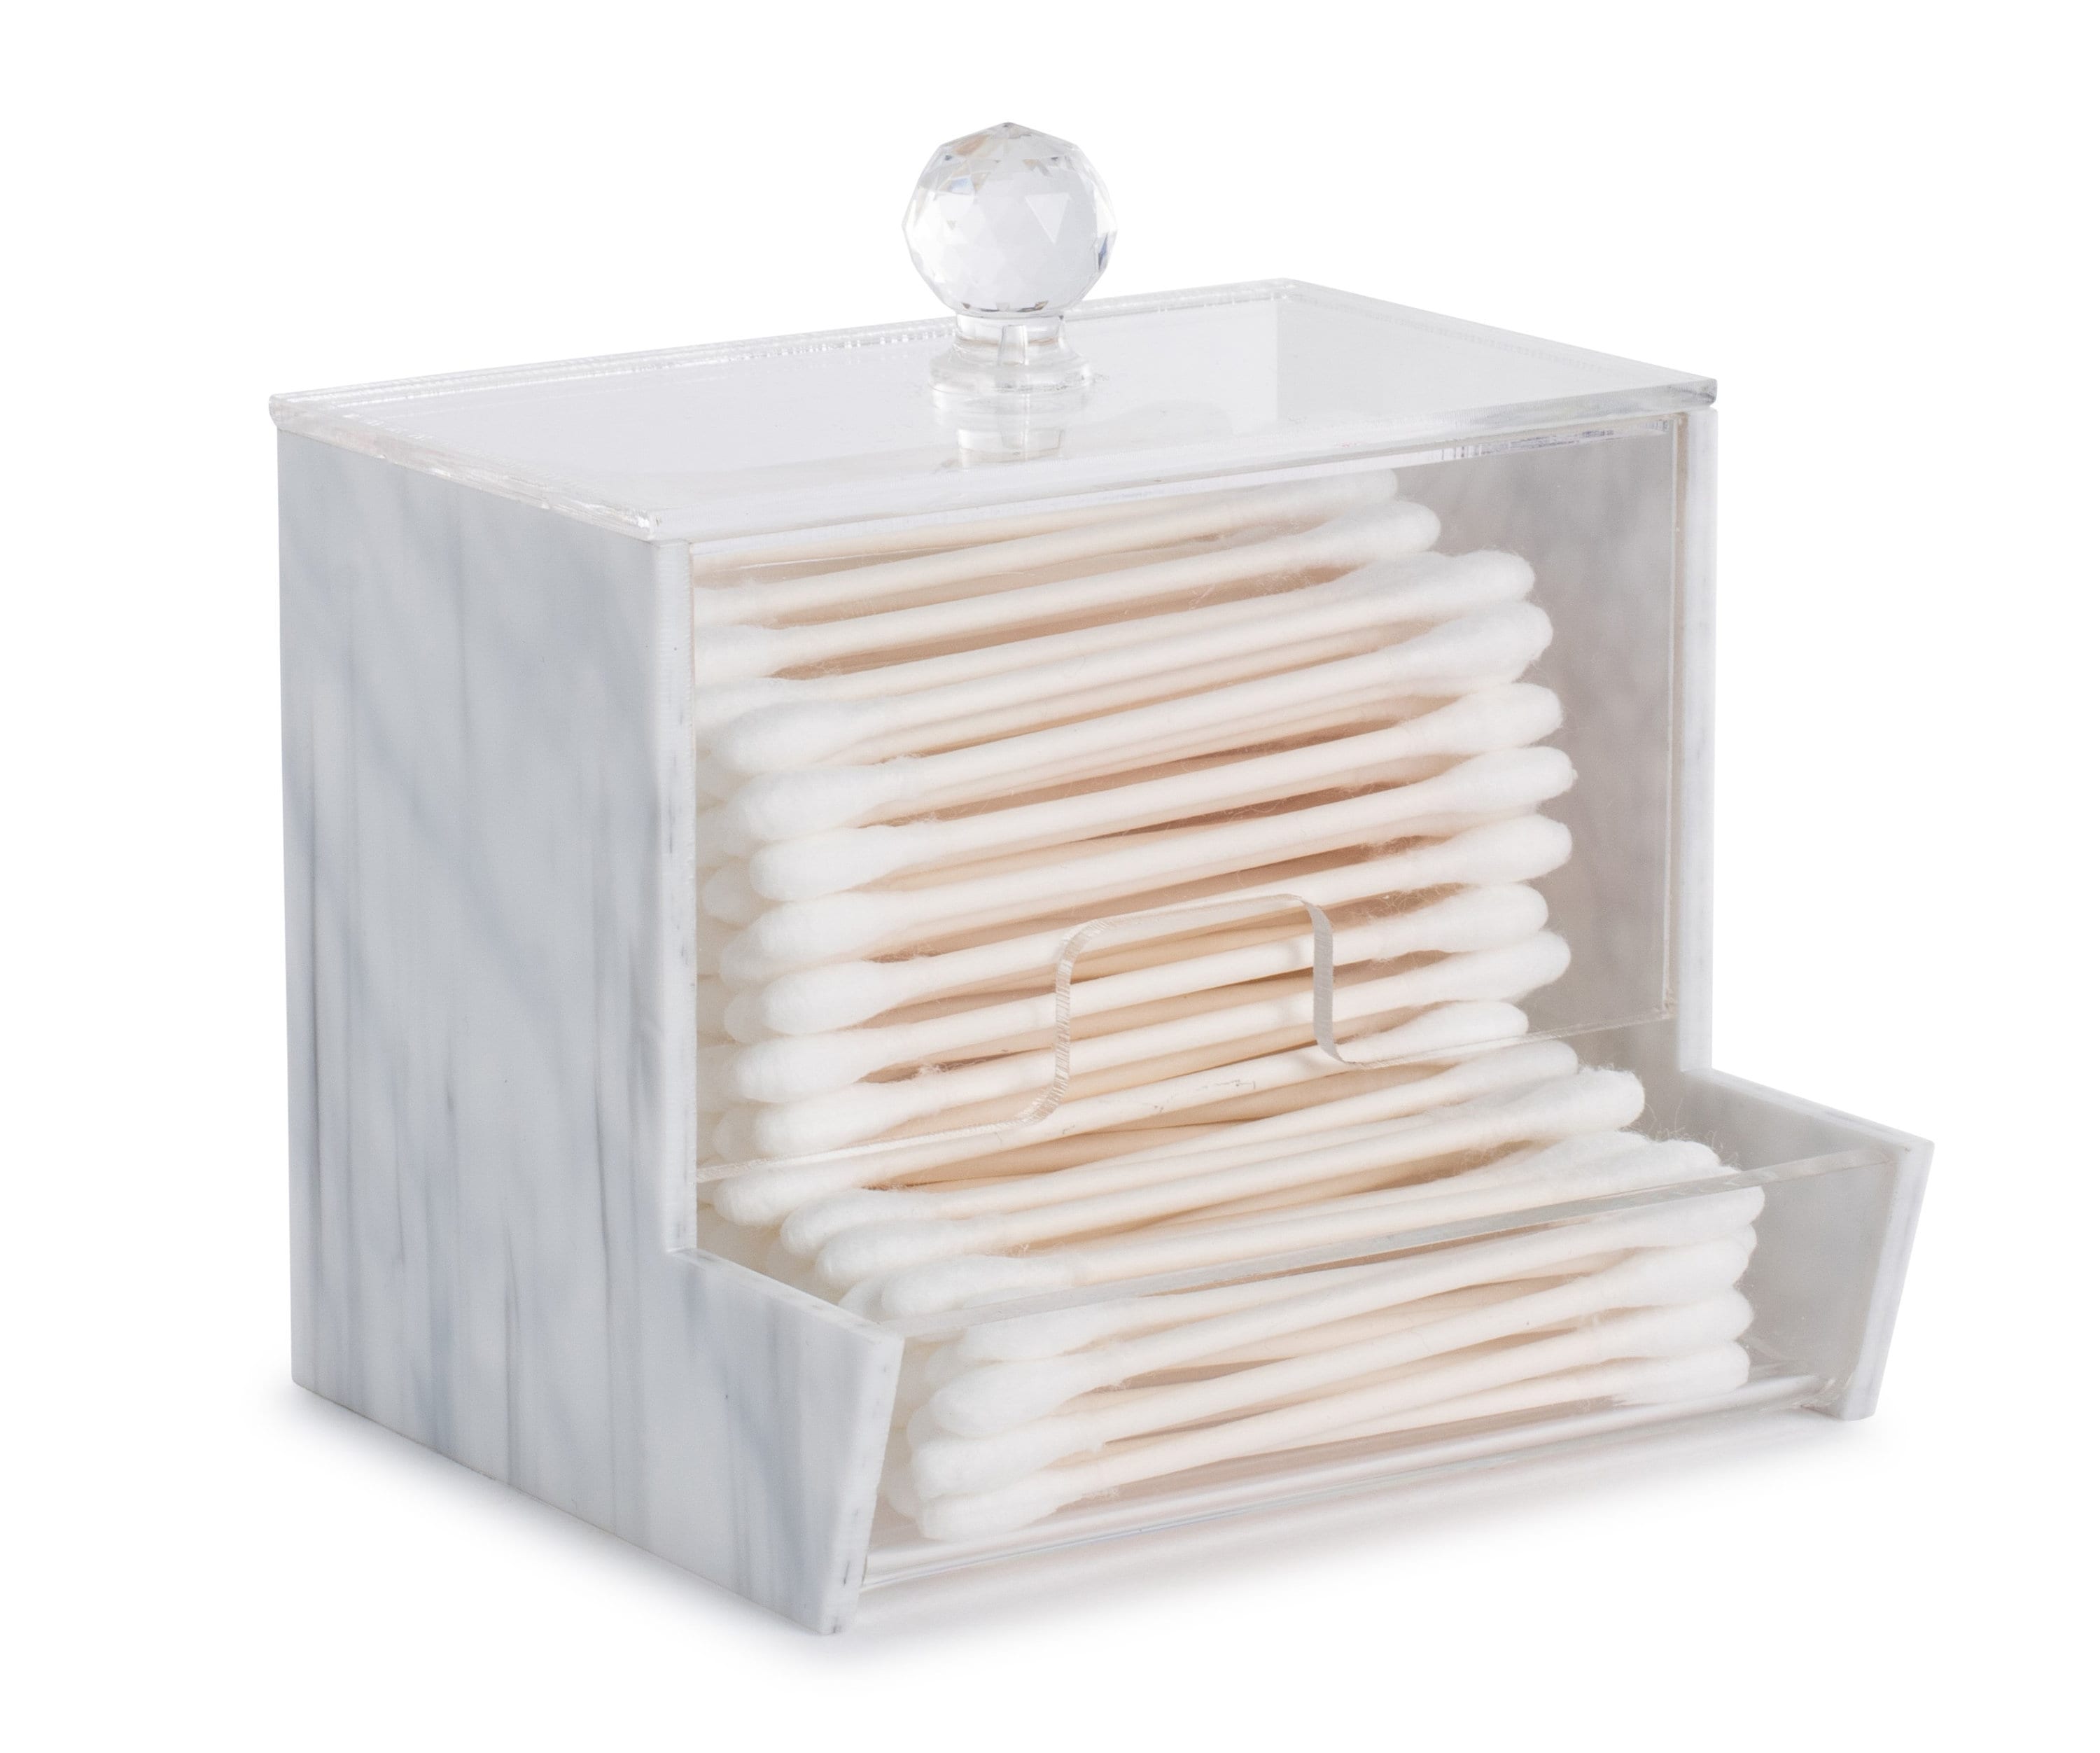 Lotus Shaped Cotton Swabs Box, 1 Piece, Cotton Swab Holder, To Decorate The  Basic Room / Toothpick C